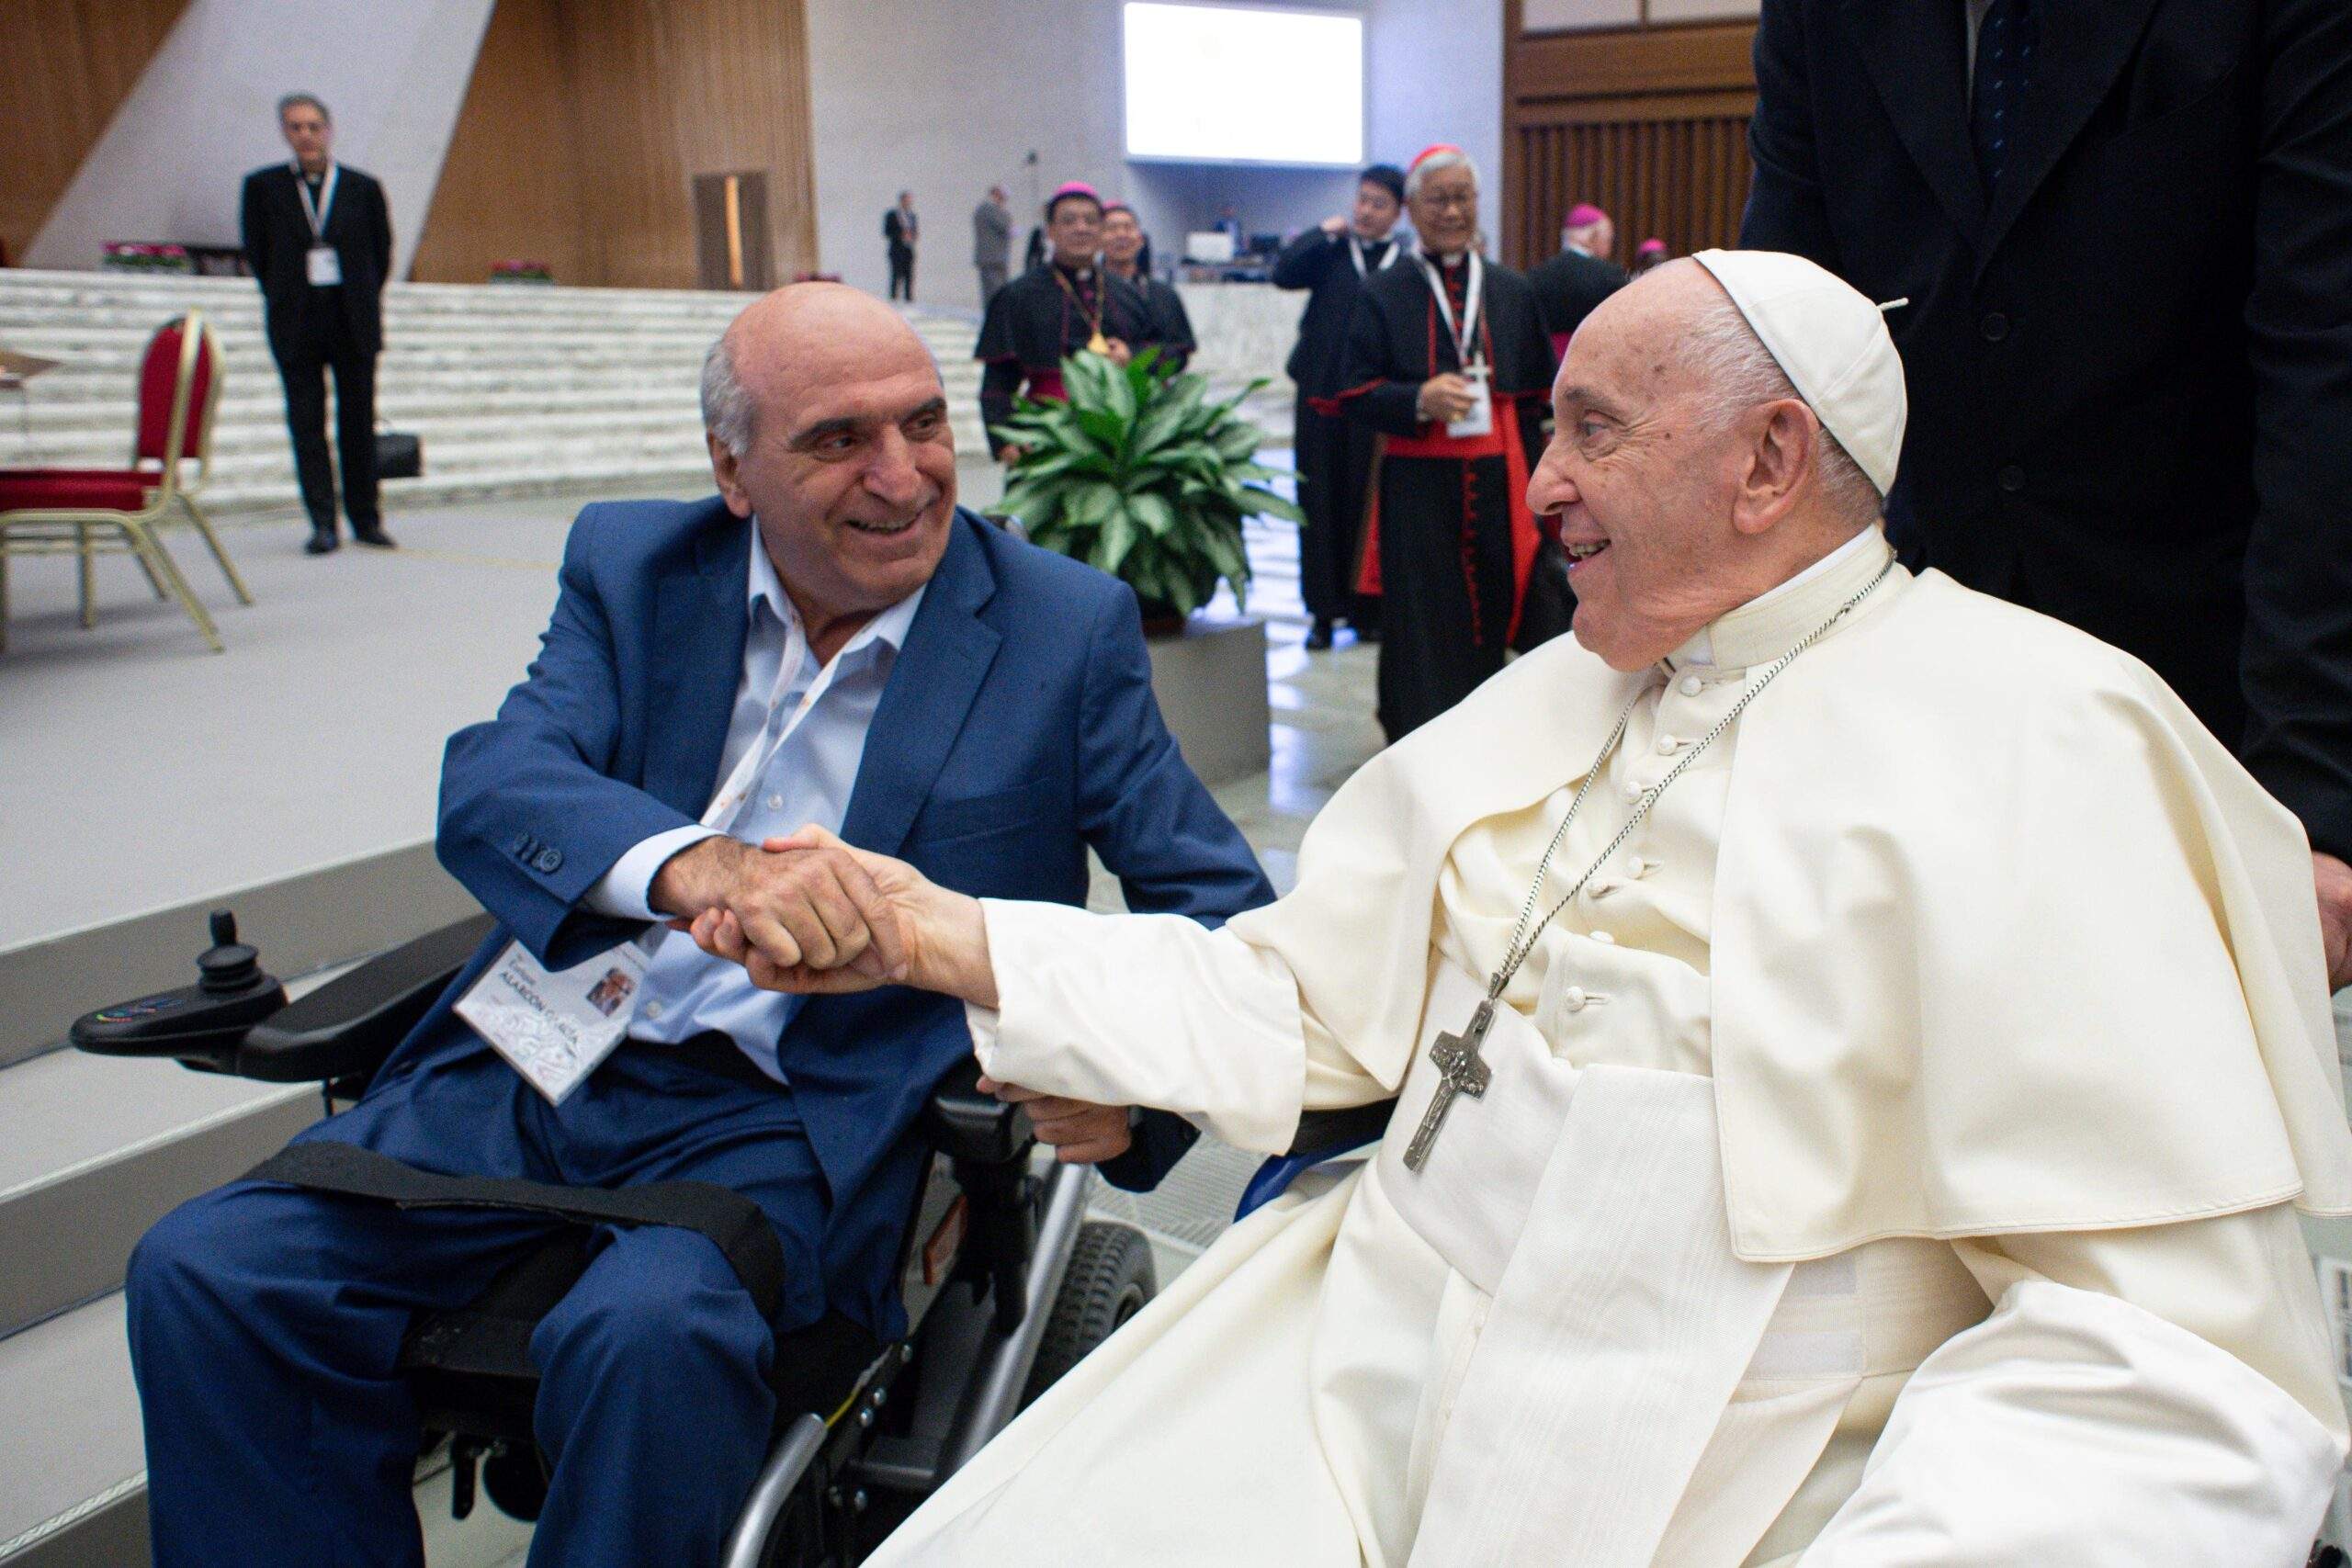 Enrique Alarcón García, a member of the synod and president of Frater España, a Christian fraternity of people with disabilities in Spain, greets Pope Francis on the first day of the assembly of the Synod of Bishops, Oct. 4, 2023, in the Paul VI Audience Hall at the Vatican. (CNS photo/Vatican Media)